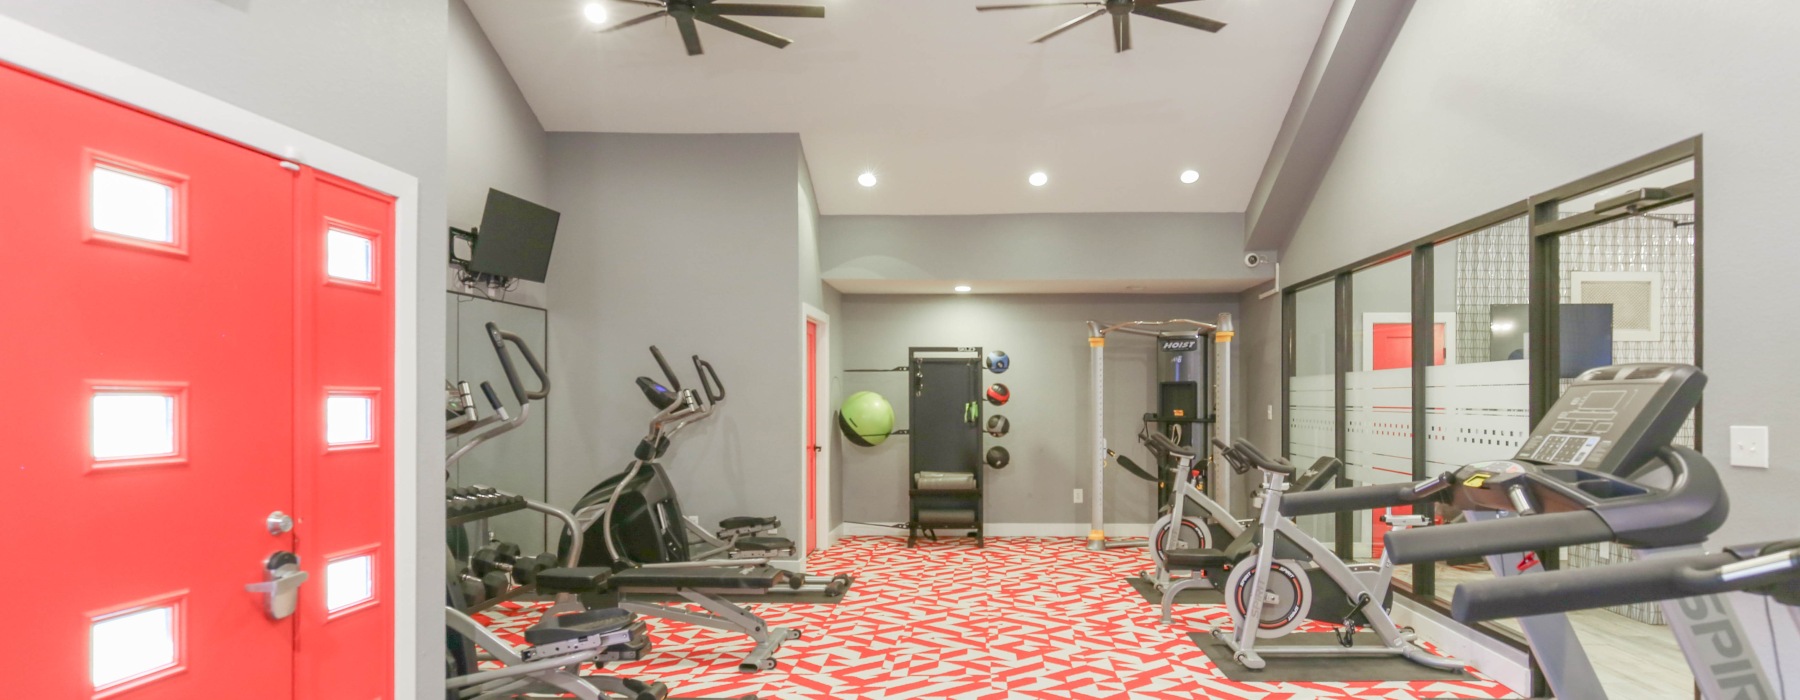 fitness room with workout equipment and pink door